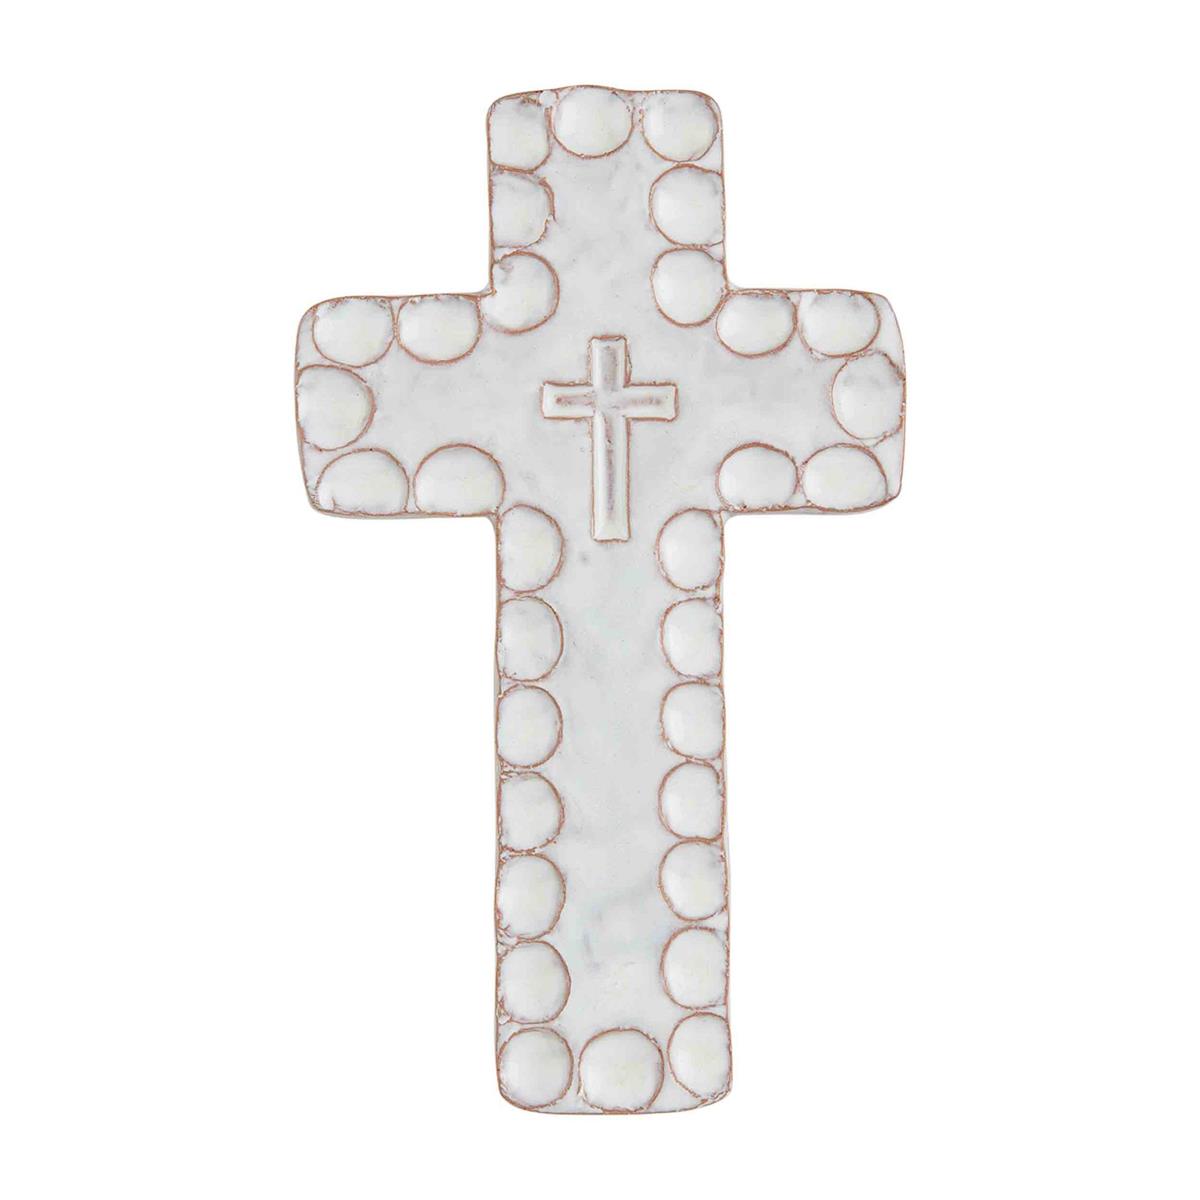 large cross sitter displayed against a white background